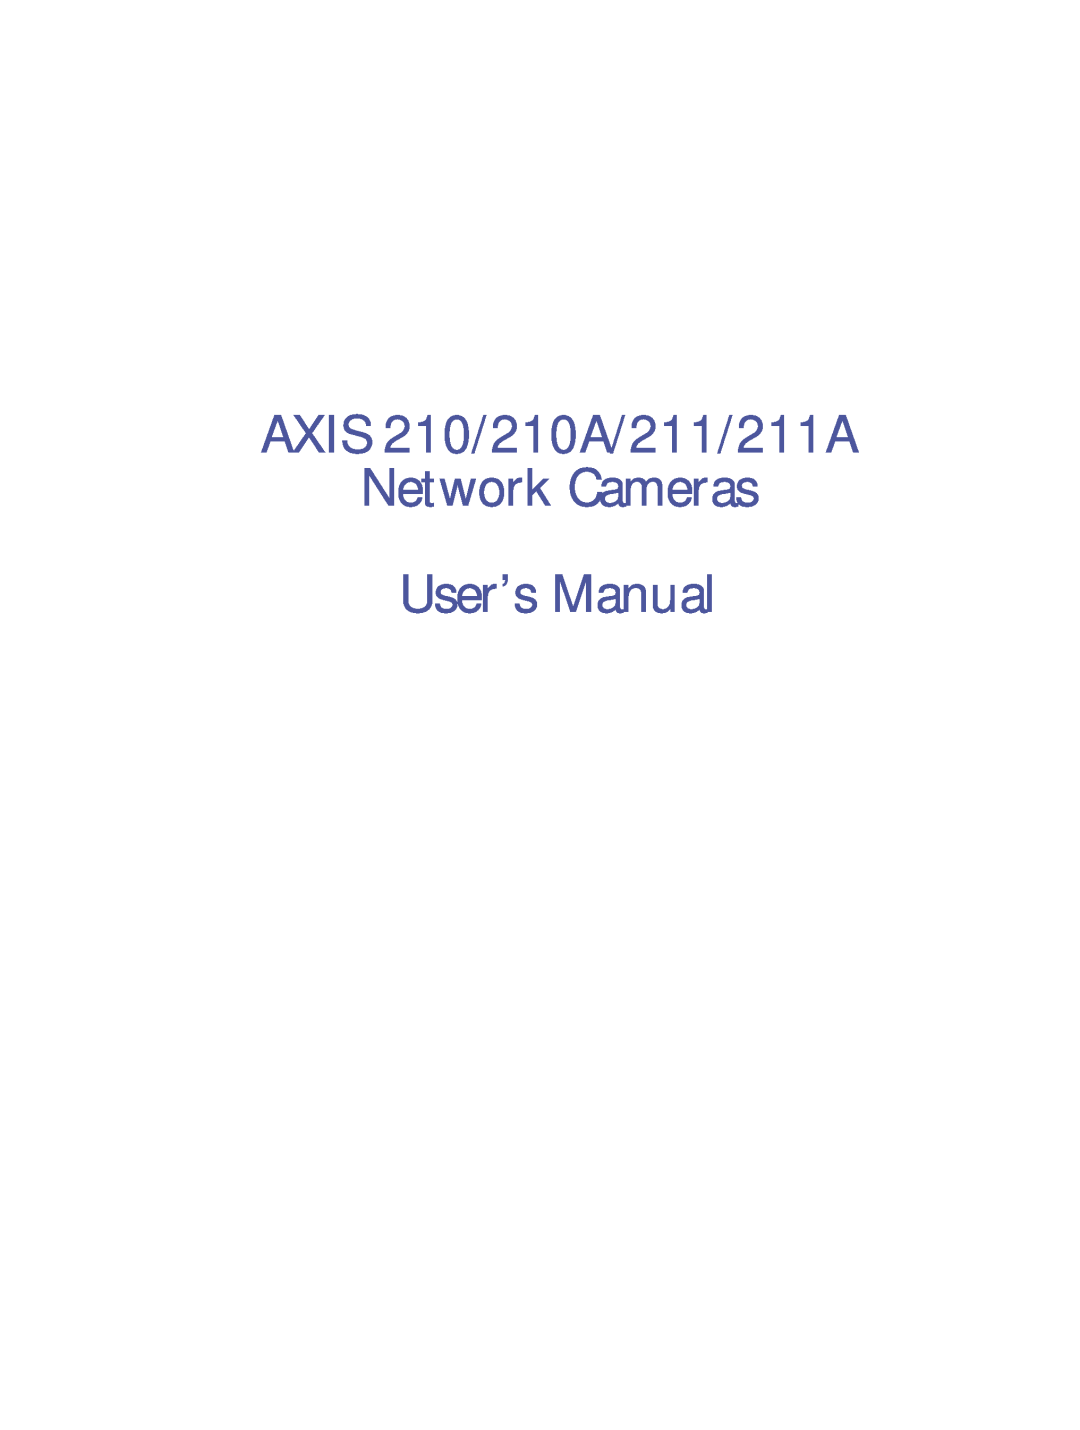 Axis Communications 211a user manual AXIS 210/210A/211/211A Network Cameras 